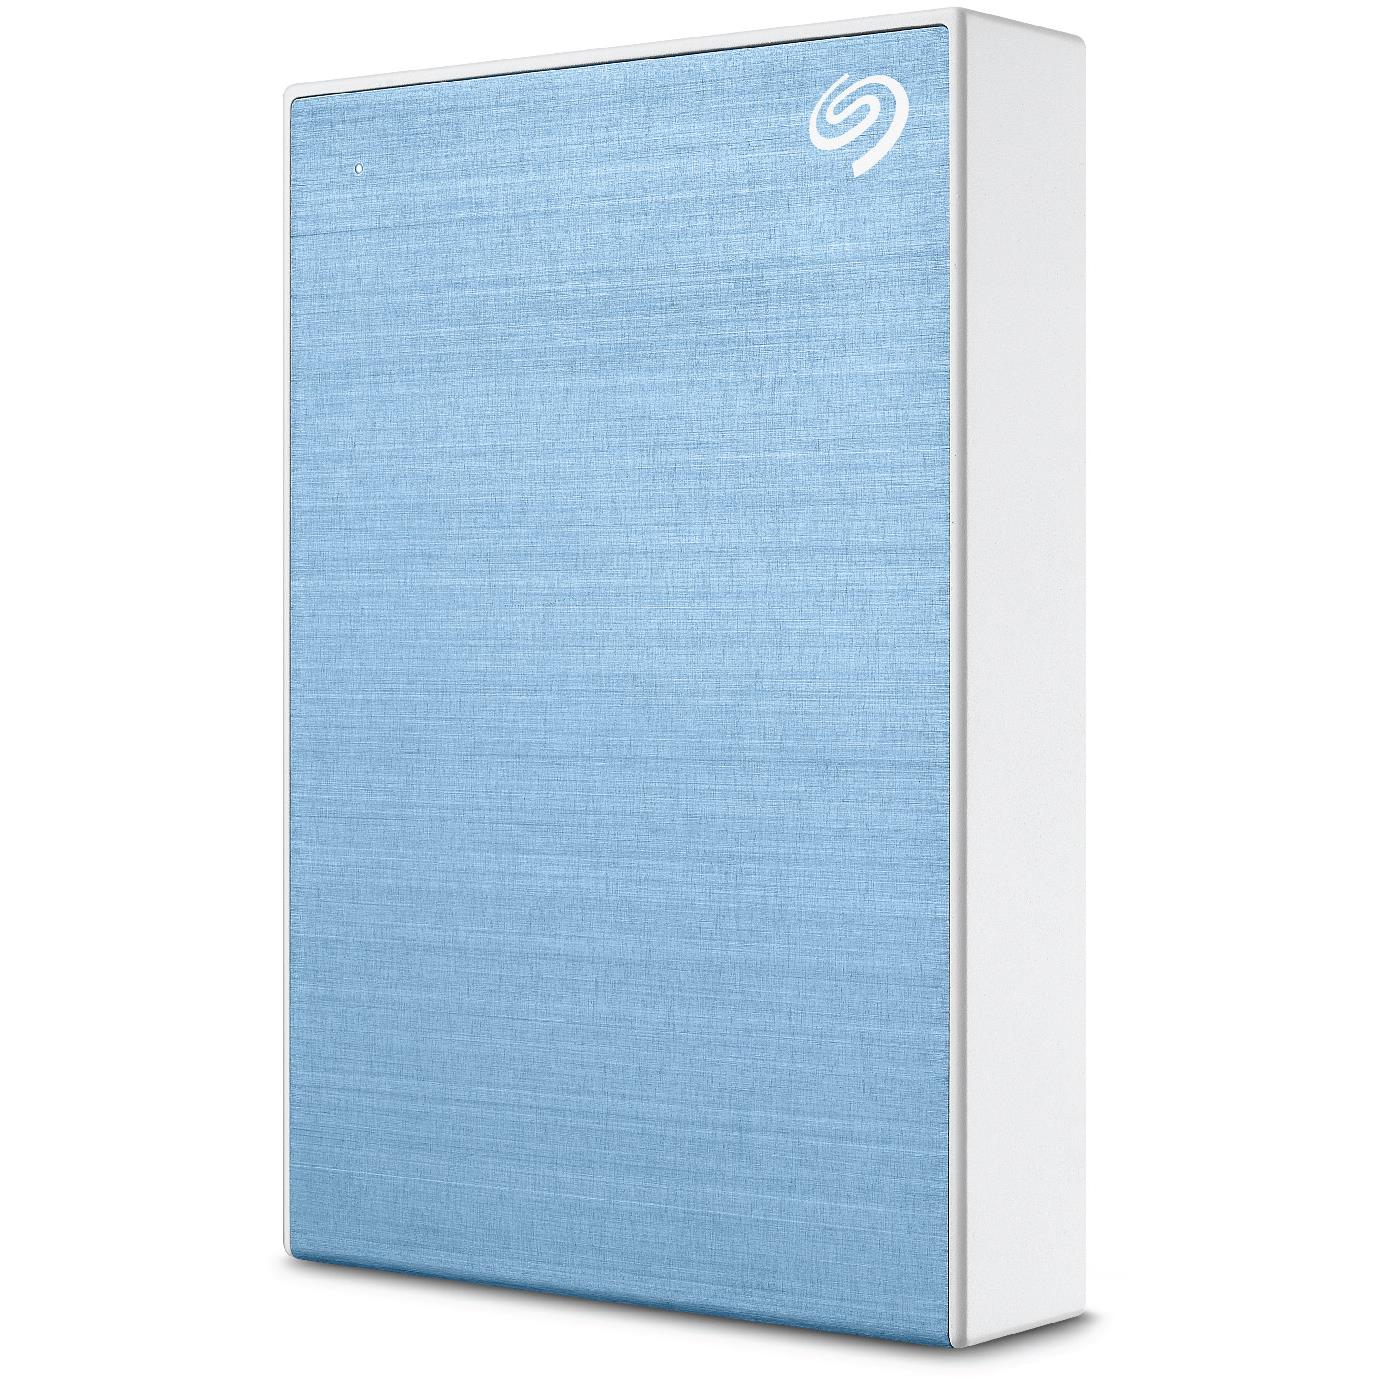 seagate one touch portable 4tb hard drive (blue)